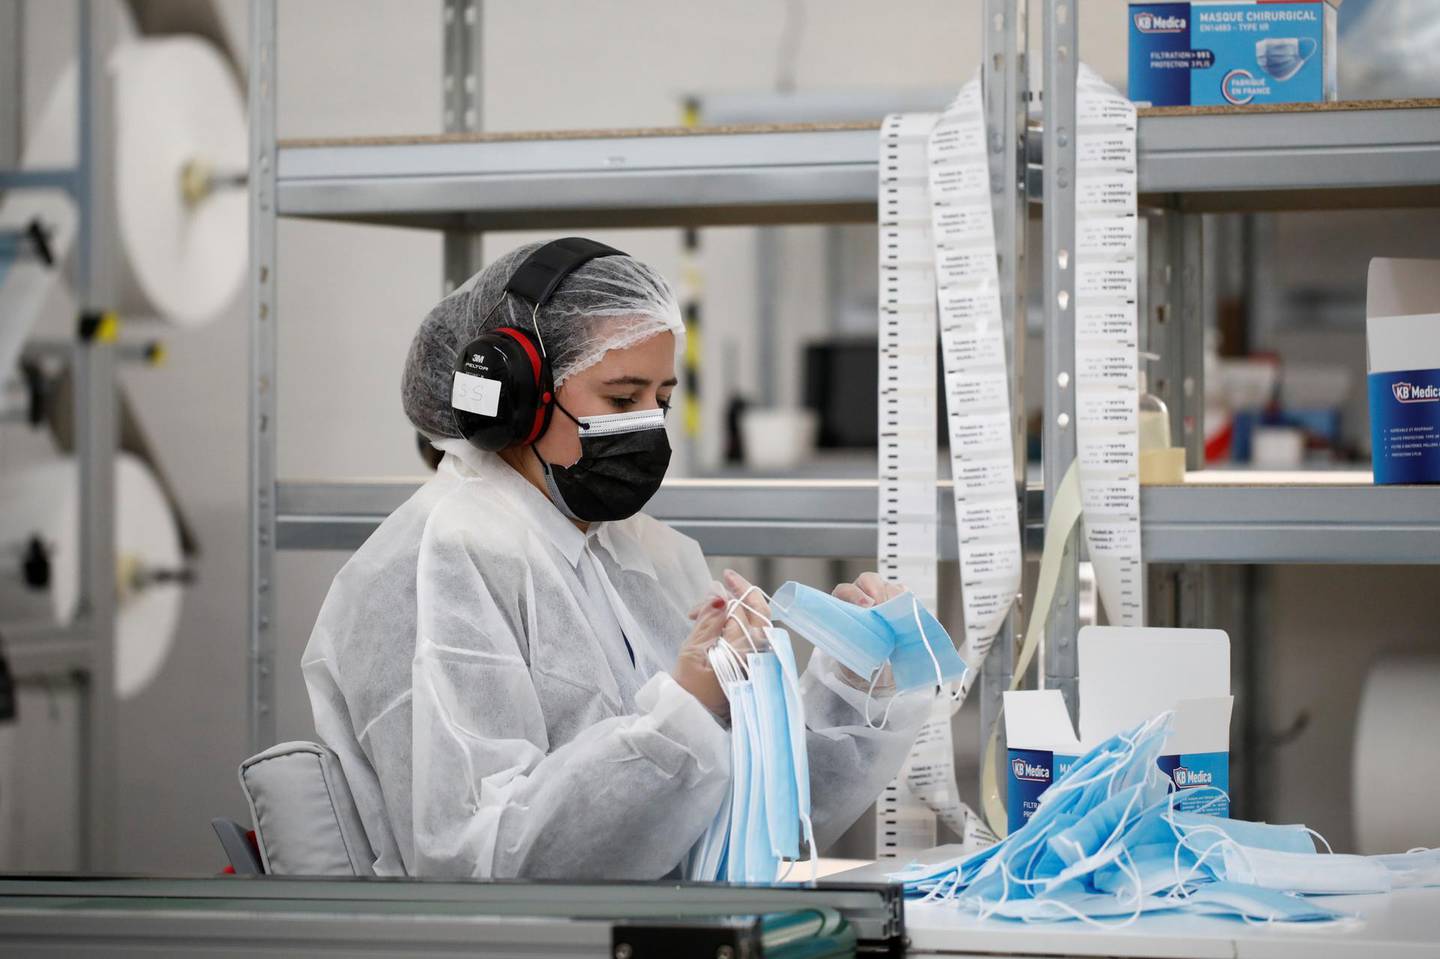 An employee gathers protective face masks from a production line conveyor at the KB MEDICA plant in Sartrouville, near Paris, as France tries to tackle a second wave of the coronavirus disease (COVID-19) outbreak, October 28, 2020. REUTERS/Benoit Tessier